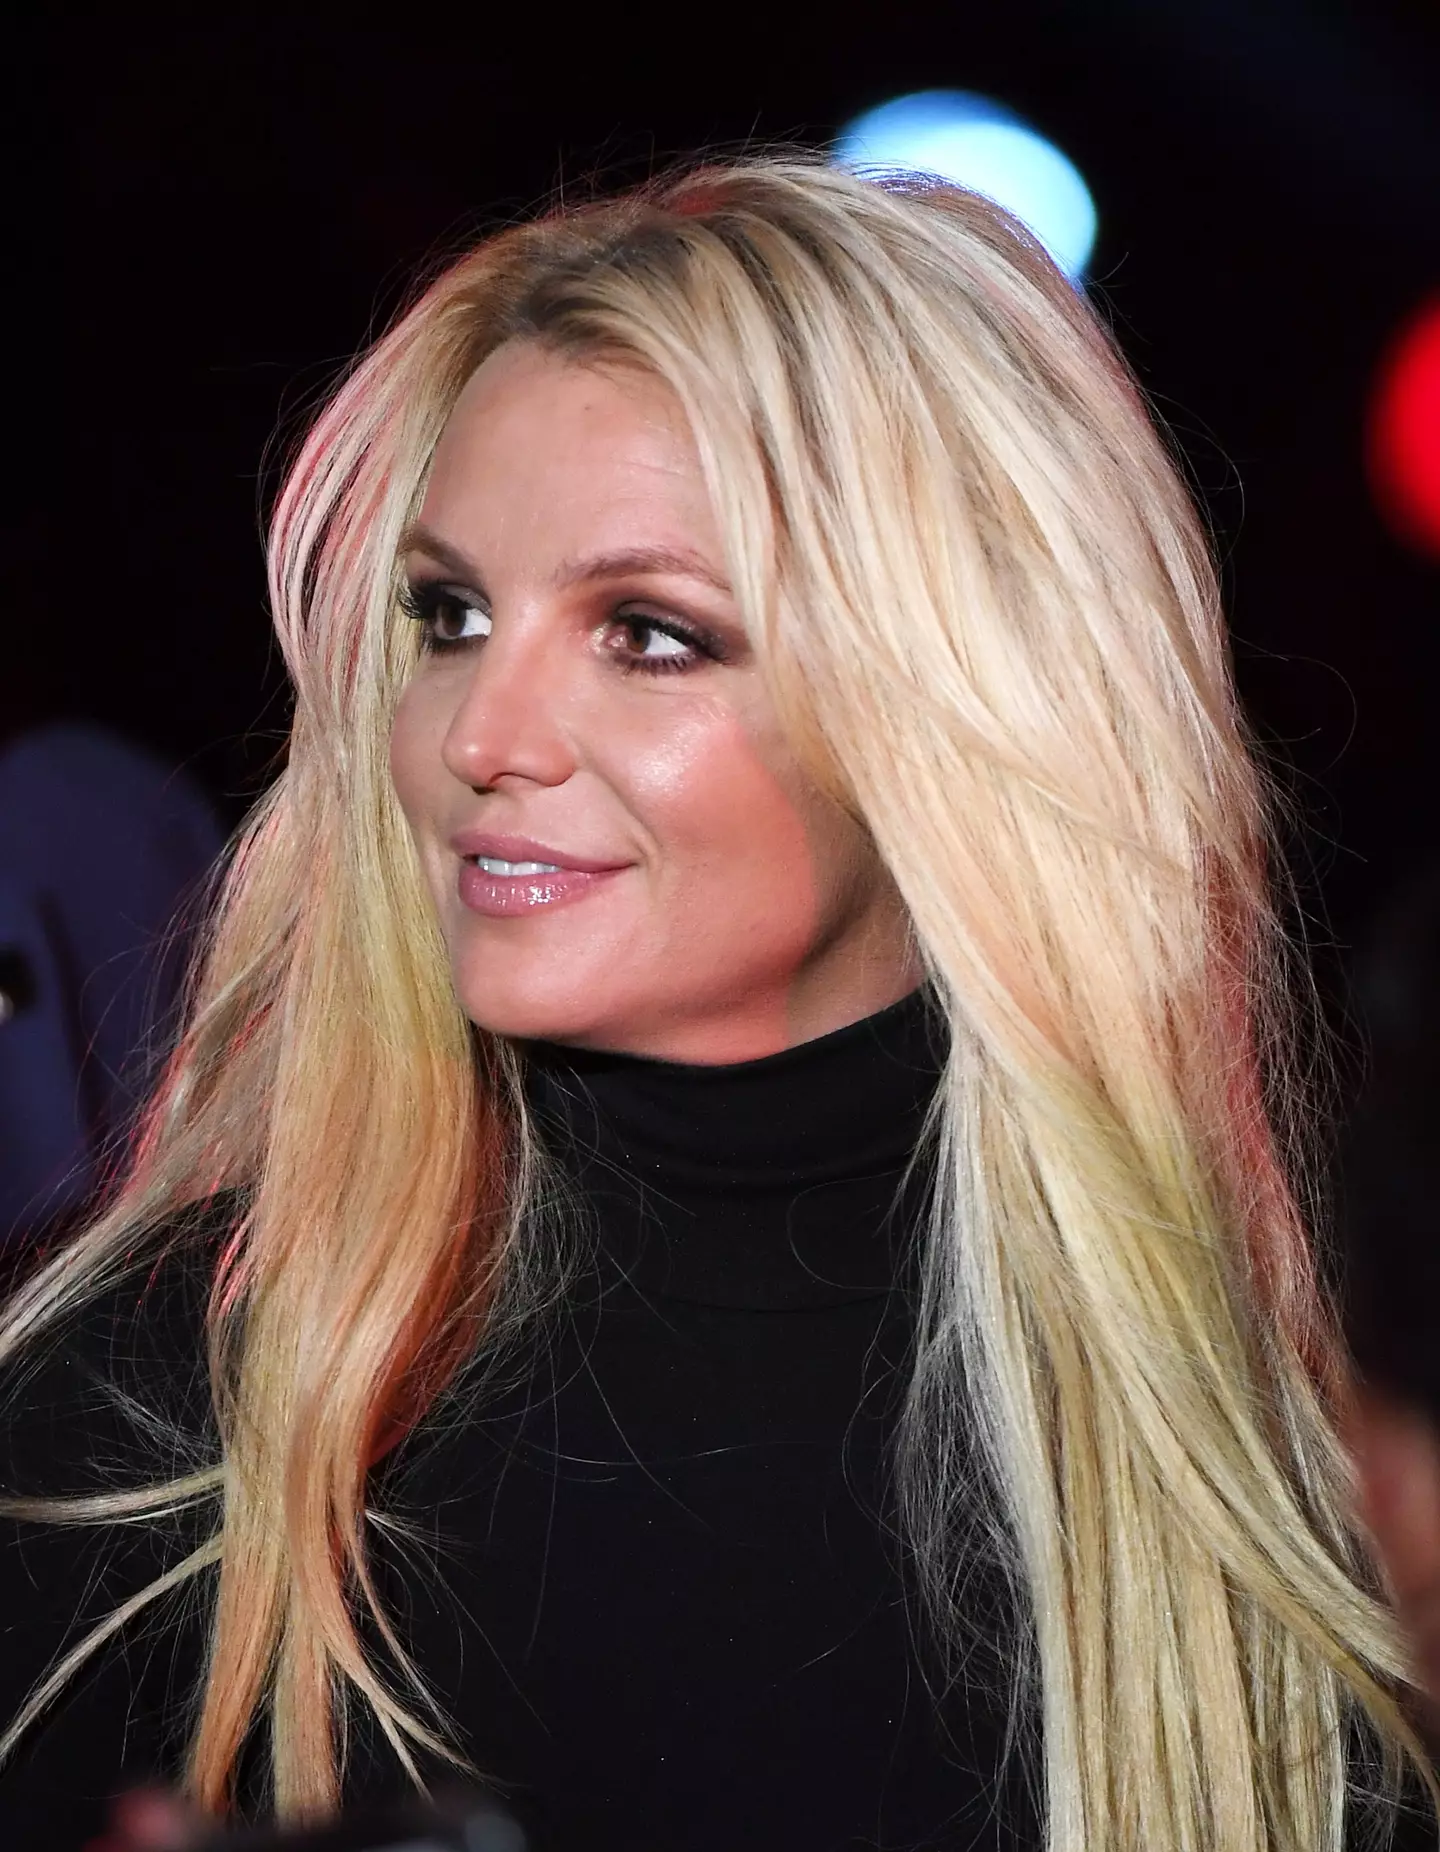 Britney's Spears' new memoir, The Woman in Me, was released today (24 October).